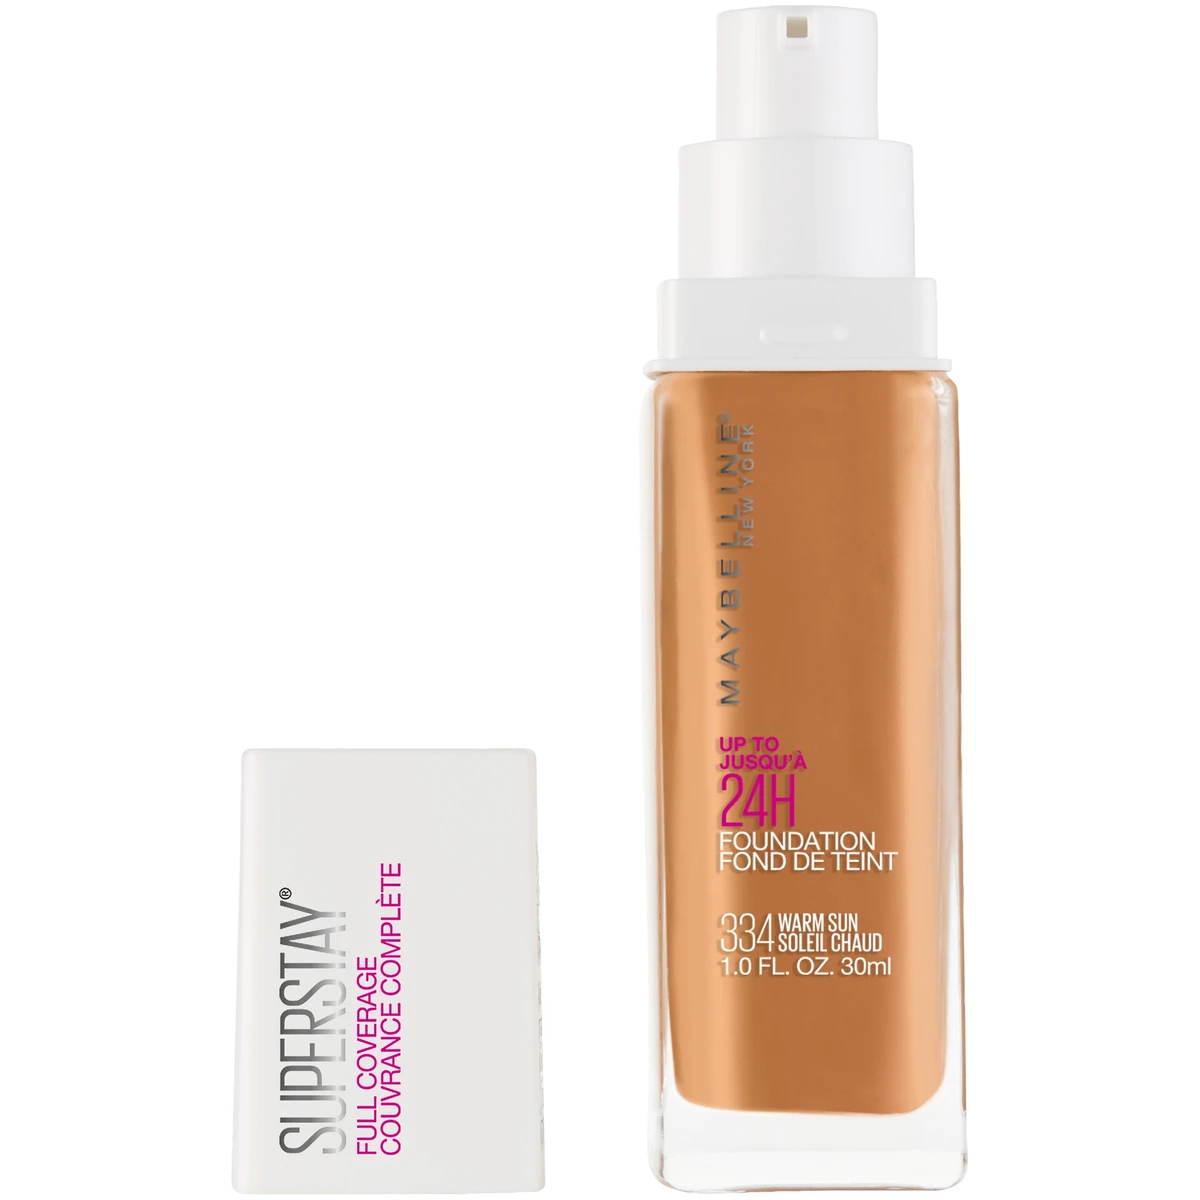 Maybelline Superstay Full Coverage Foundation Tan Shades 1 fl oz